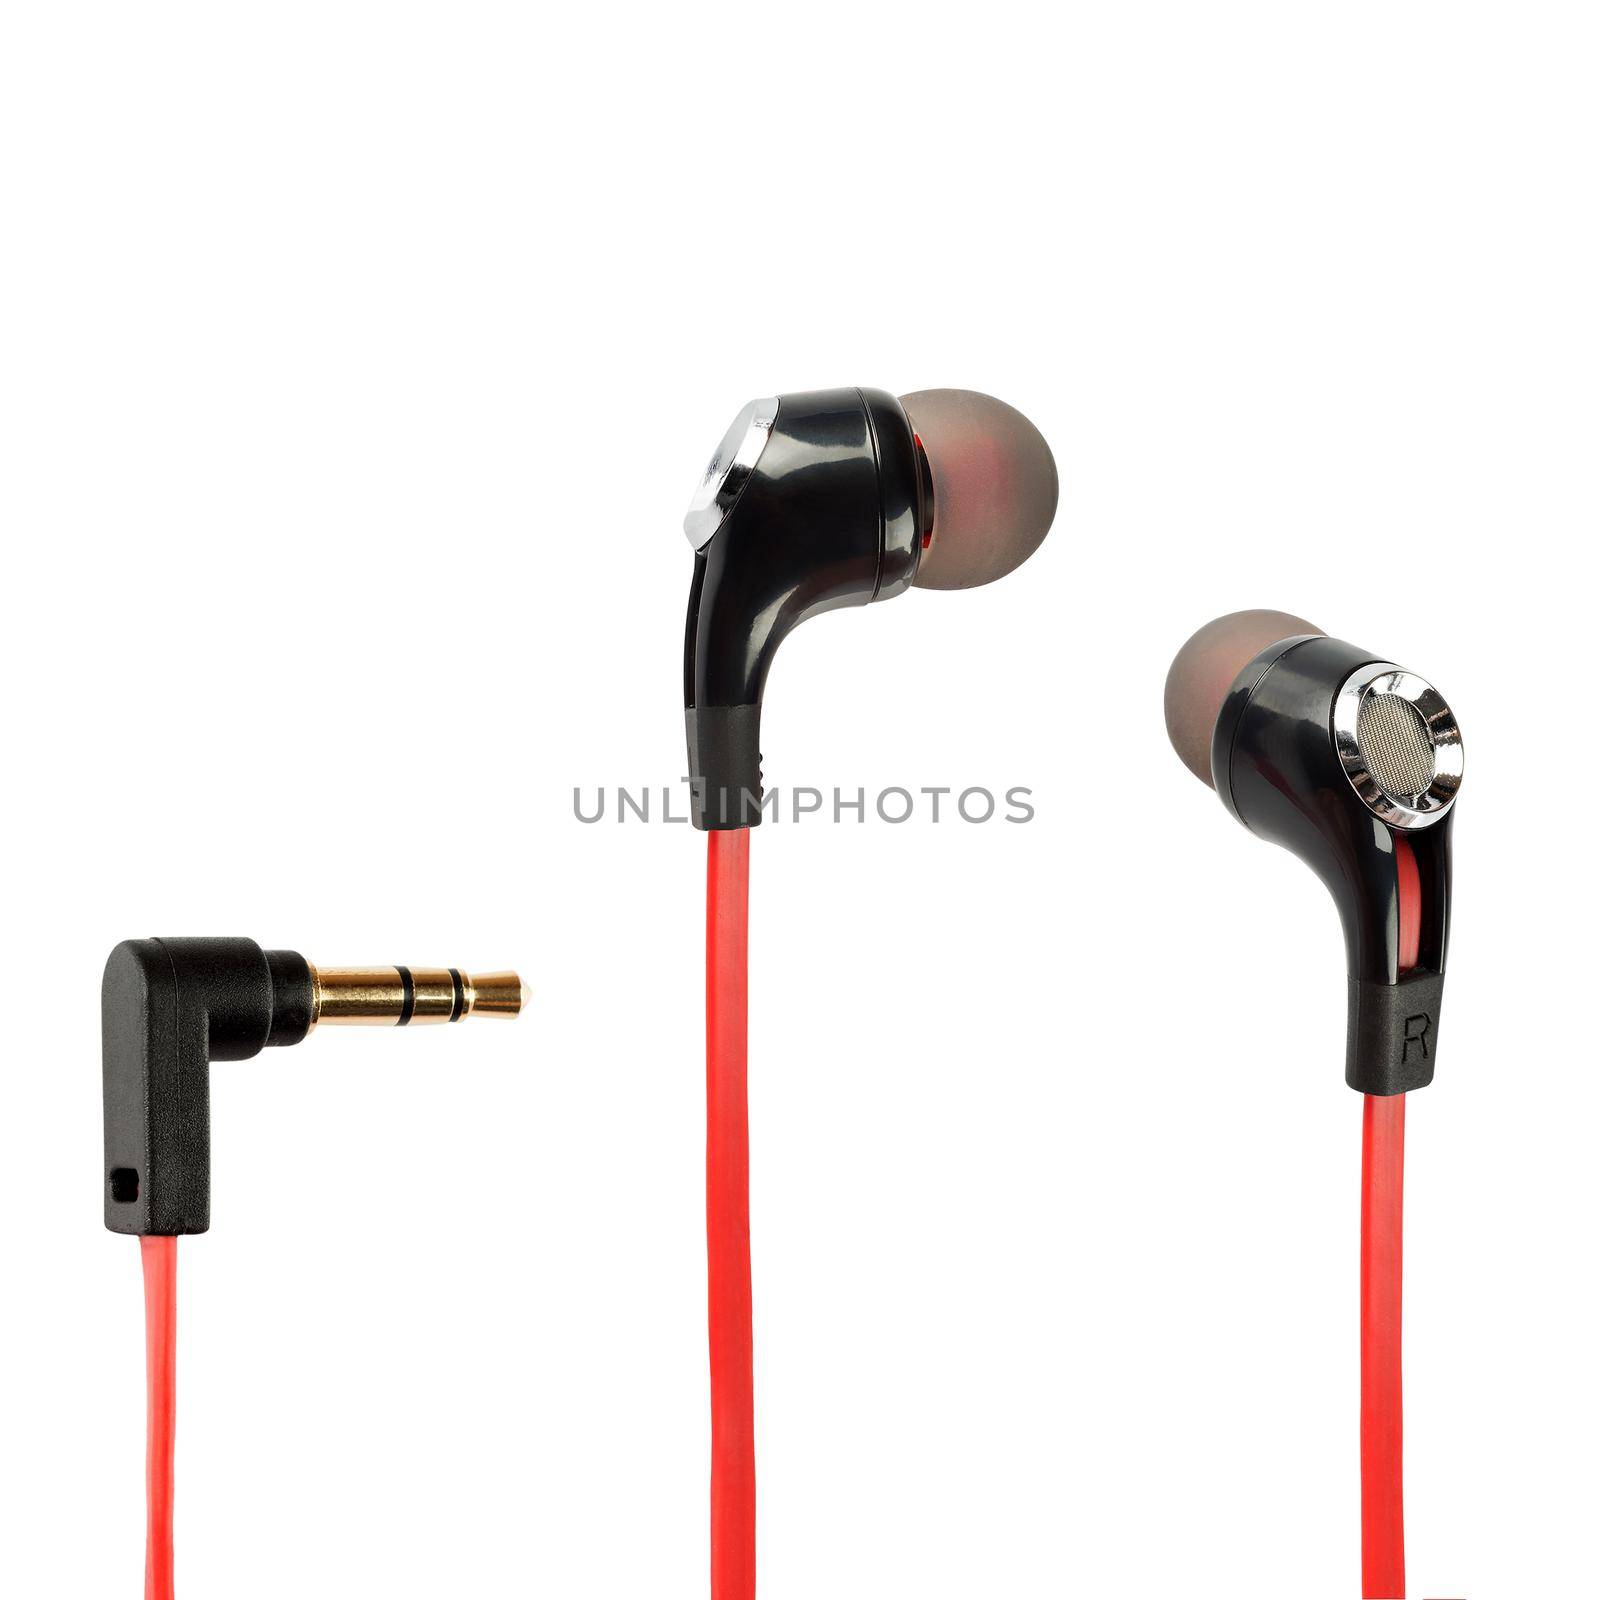 Black headphones with red cable over white background